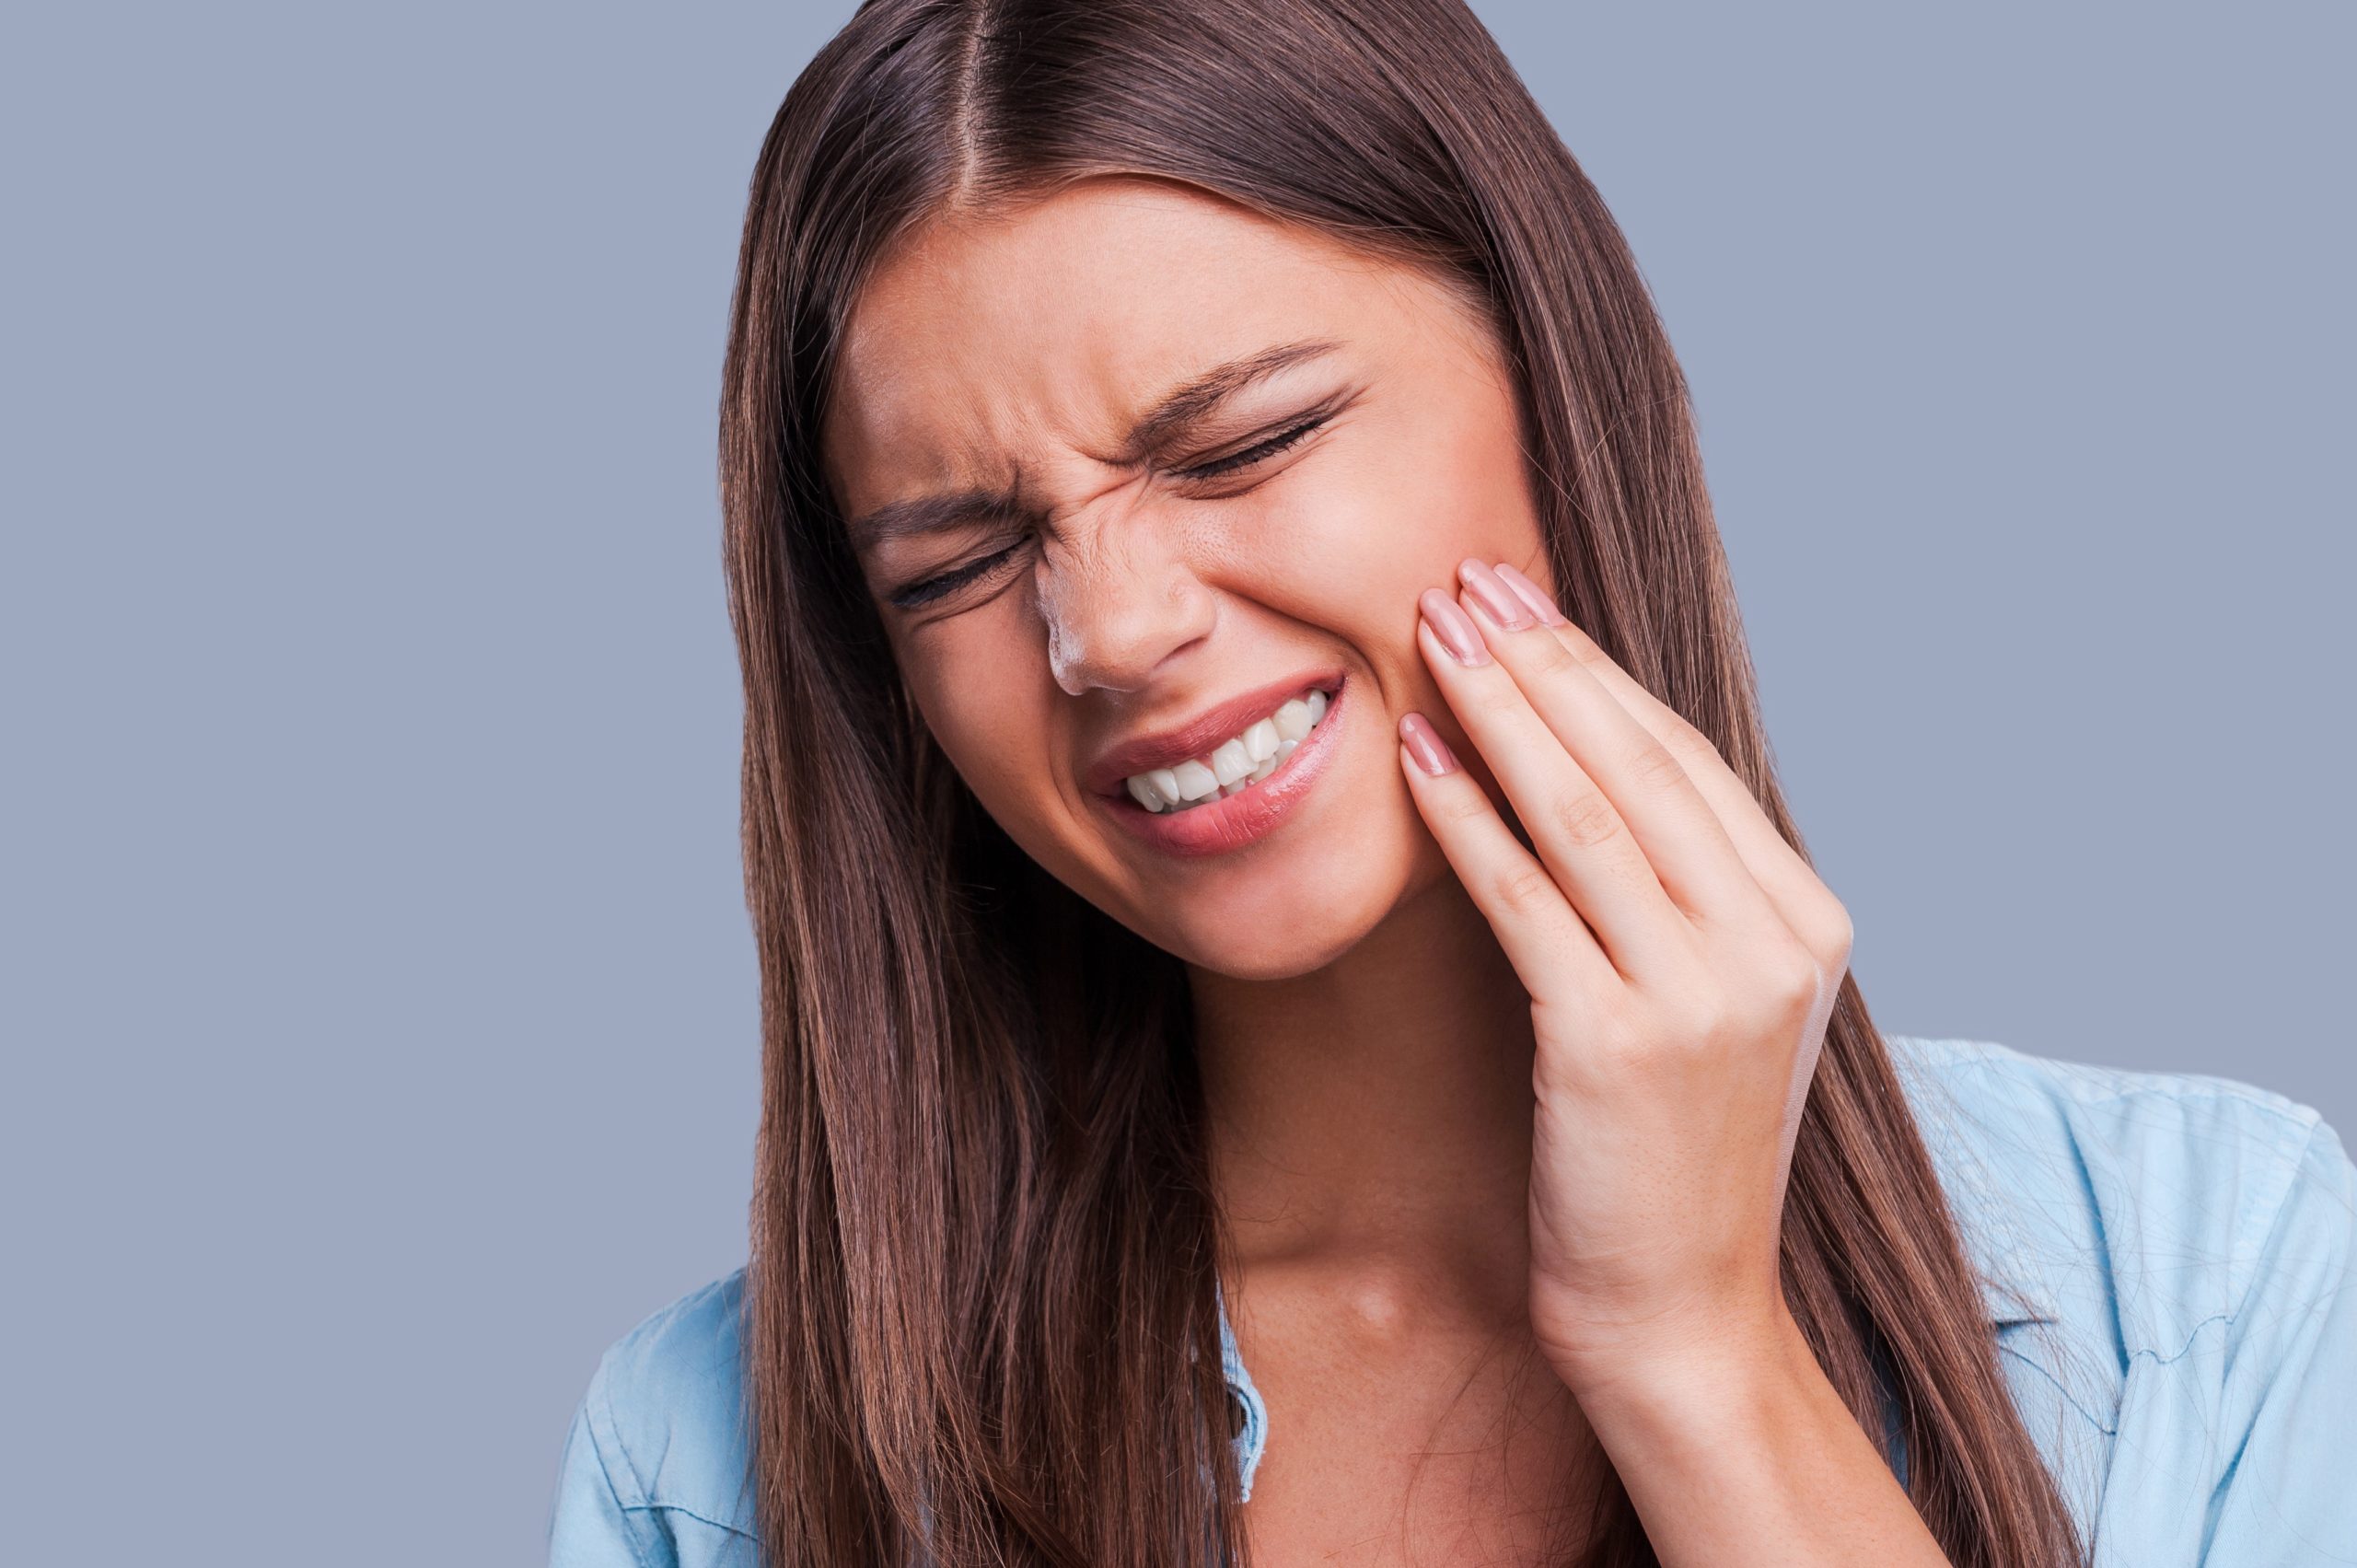 Young woman suffering from toothache while standing against grey background